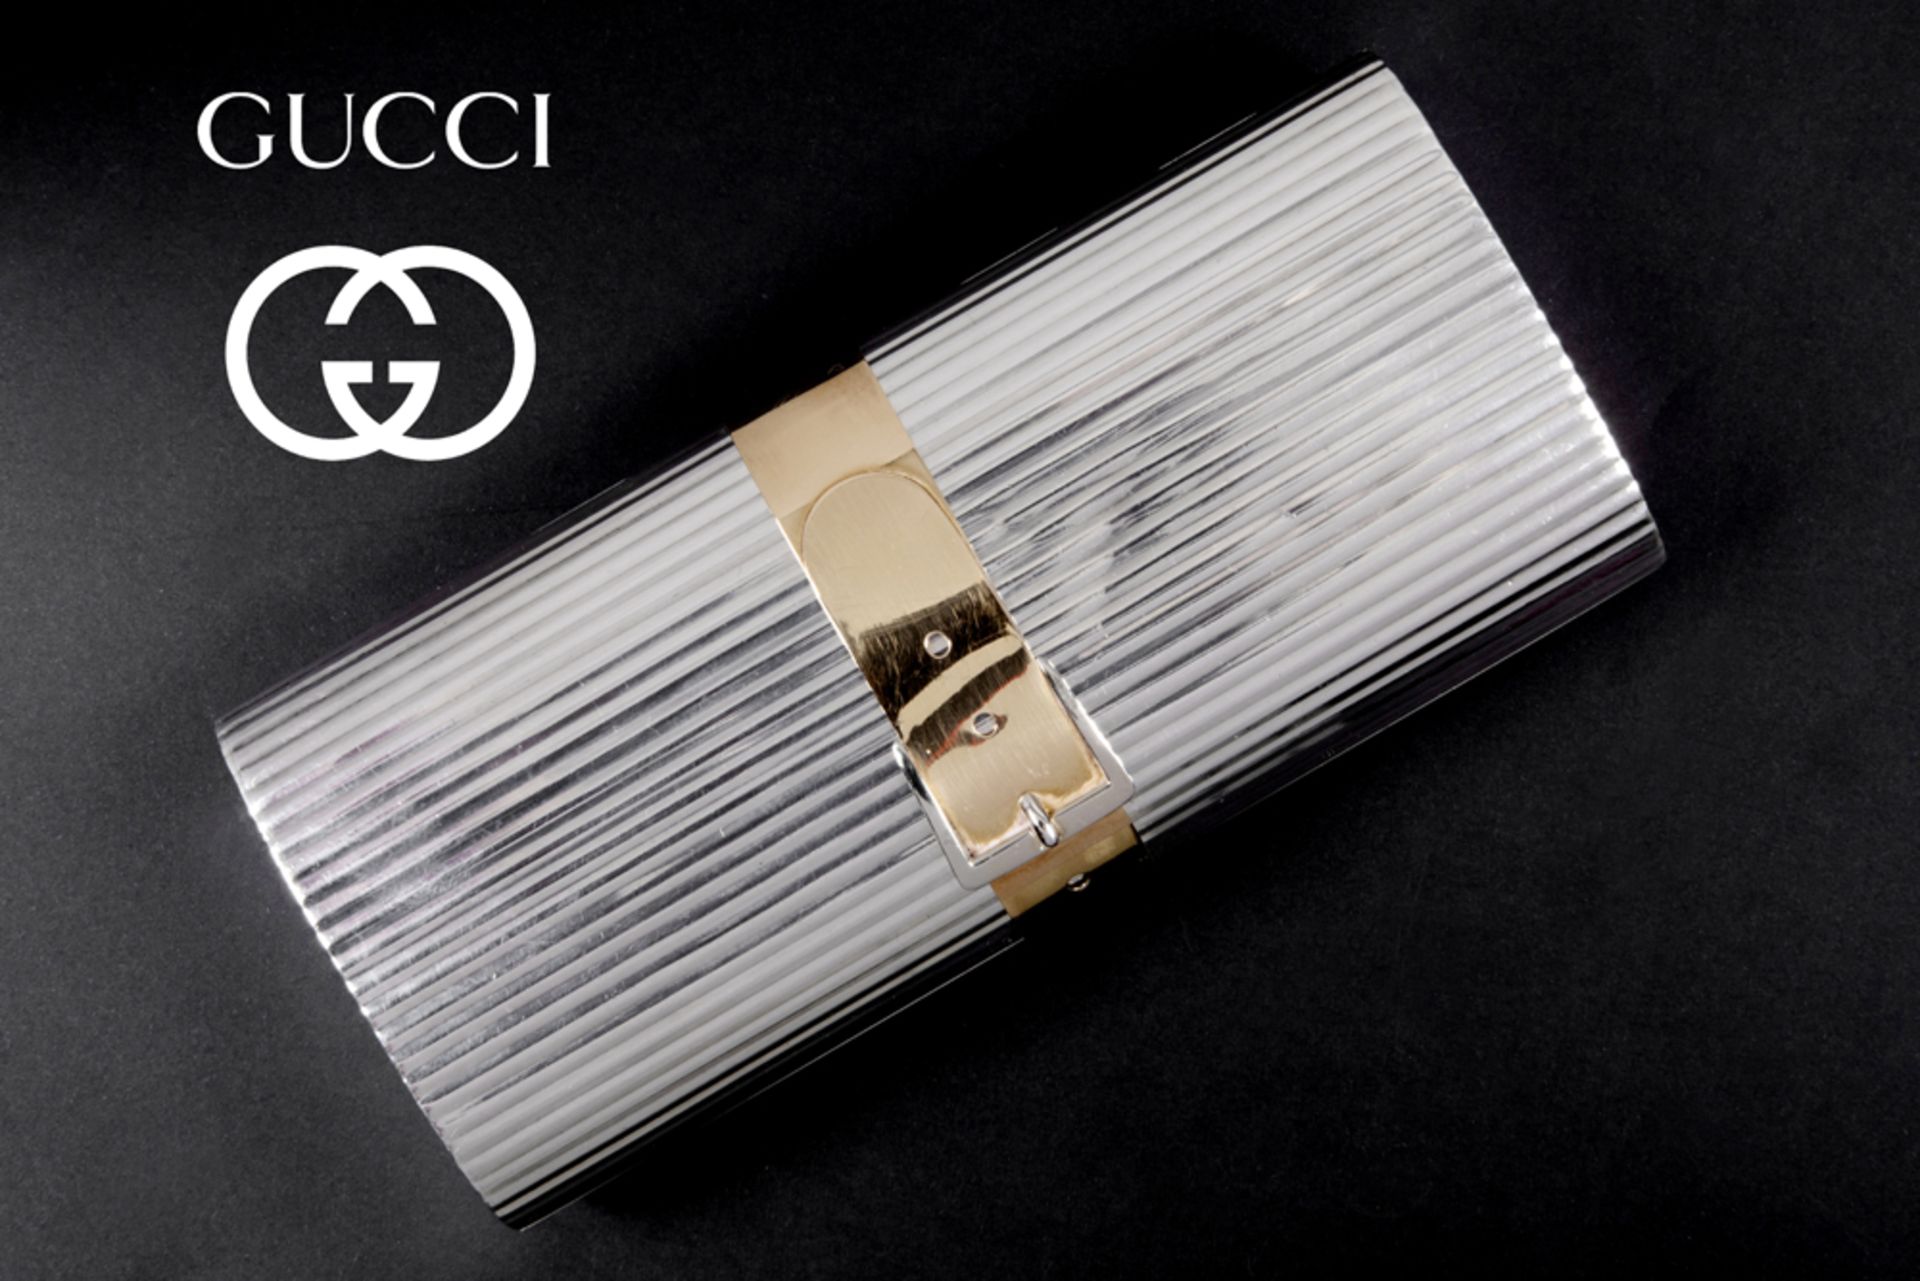 Gucci signed vintage evening purse in marked silver and marked yellow gold (18 carat) with typical